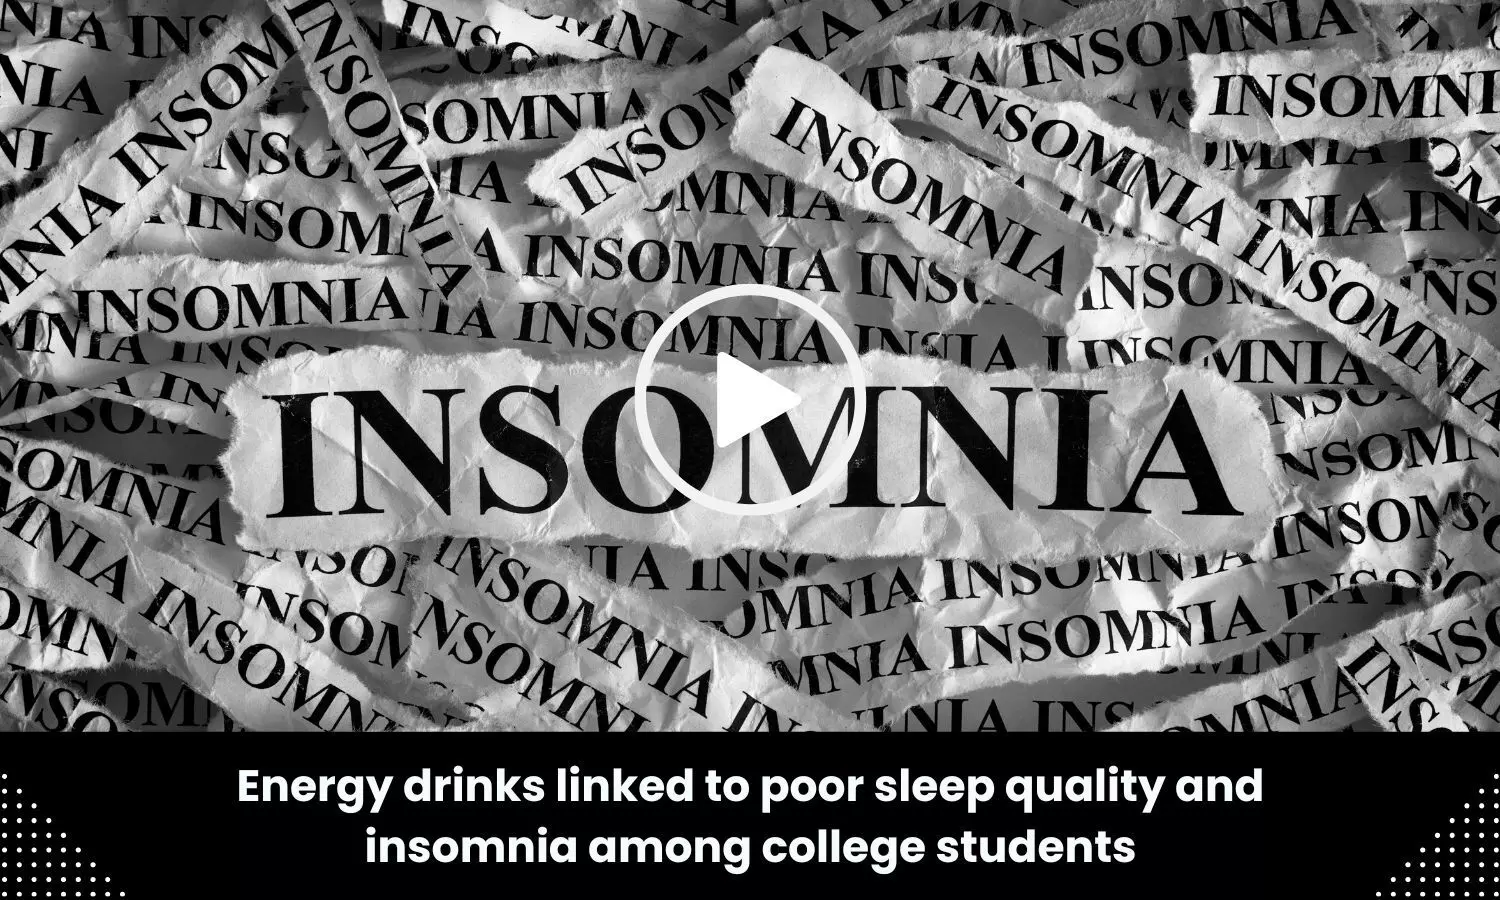 Energy drinks to cause poor sleep quality and insomnia among college students